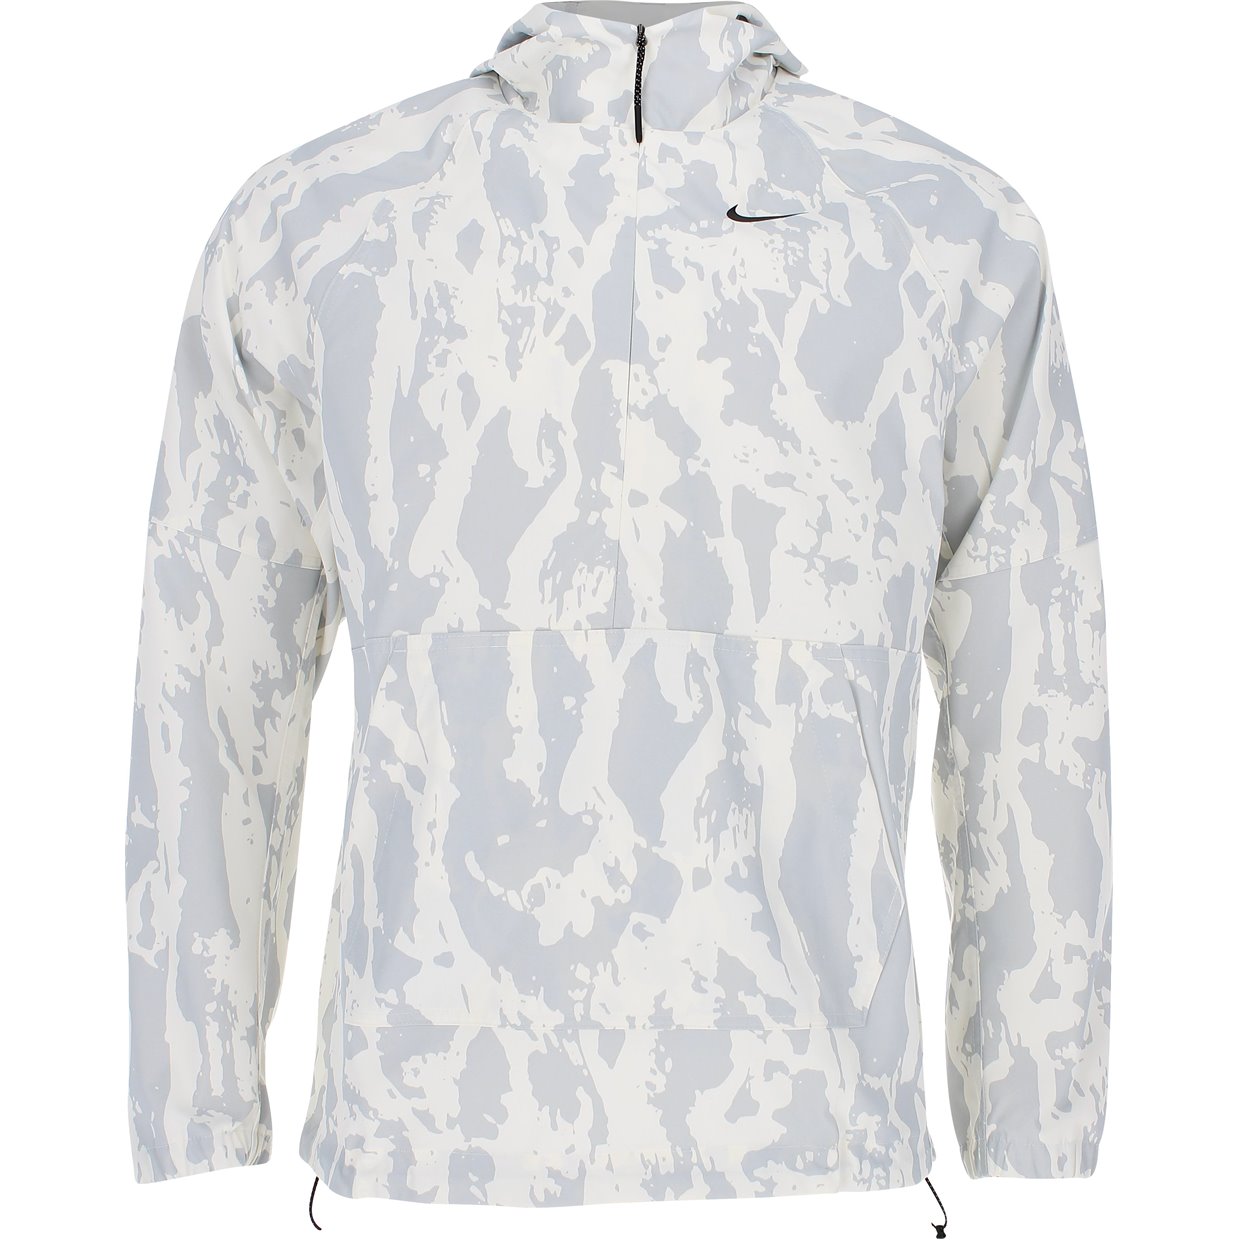 How to buy the Nike hoodie Rory McIlroy was wearing at the U.S. Open